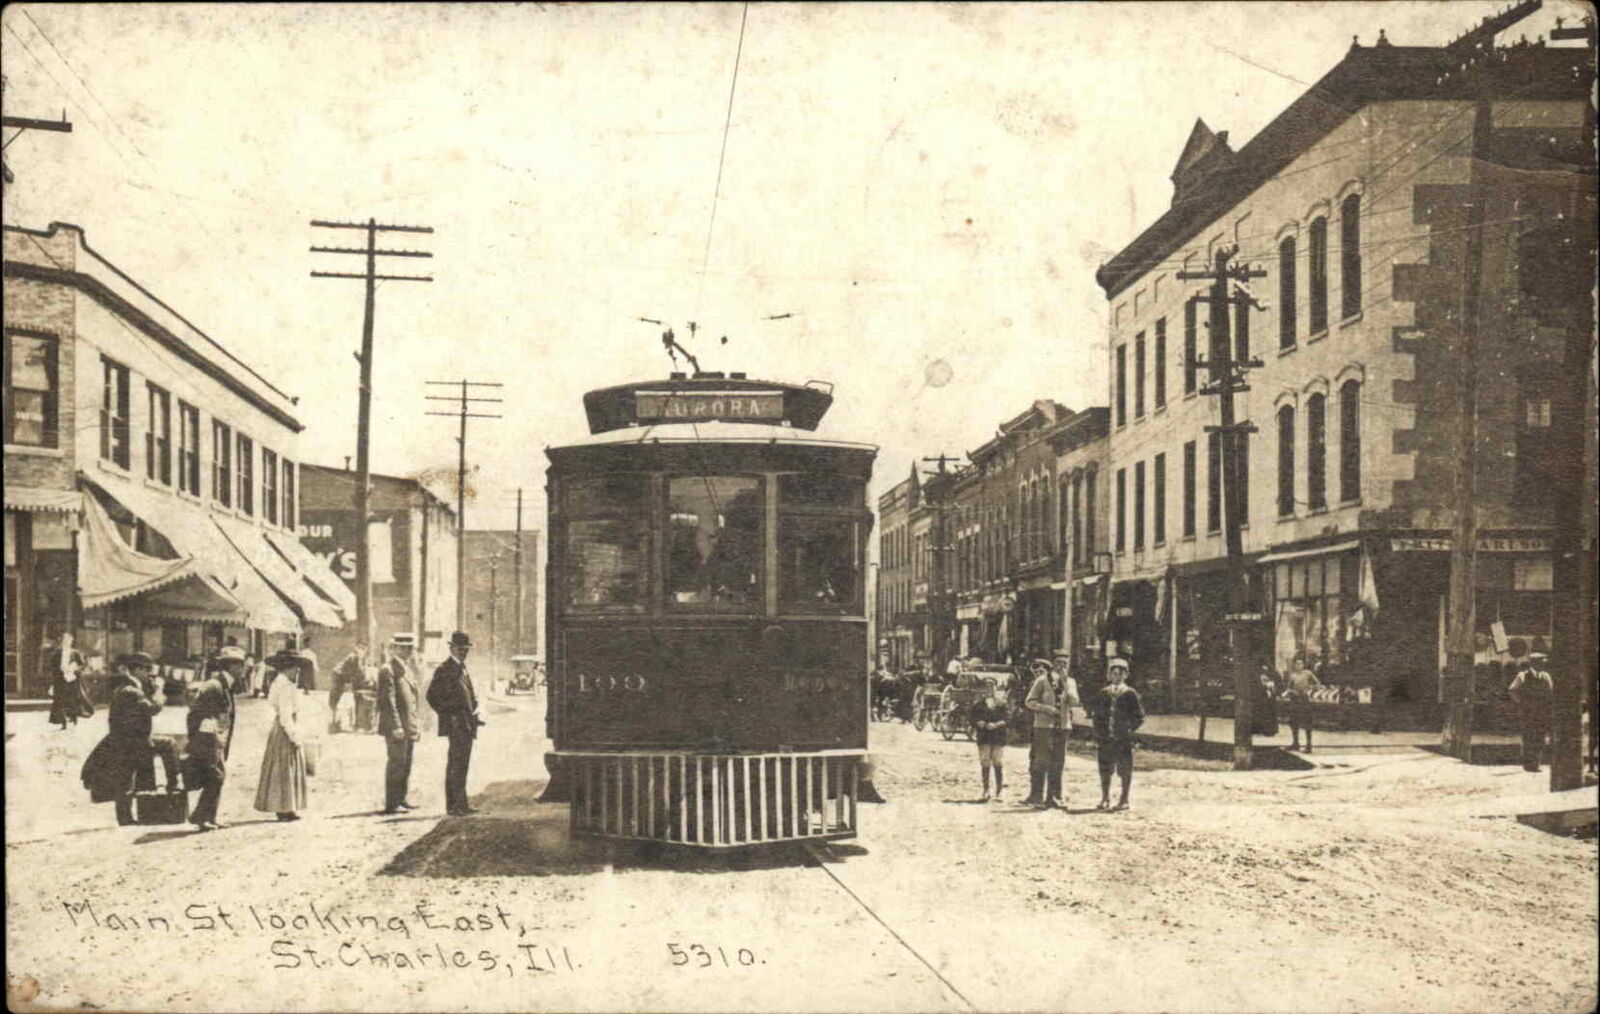 St. Charles Illinois IL Trolley CLOSE-UP CR Childs c1910 Real Photo Postcard